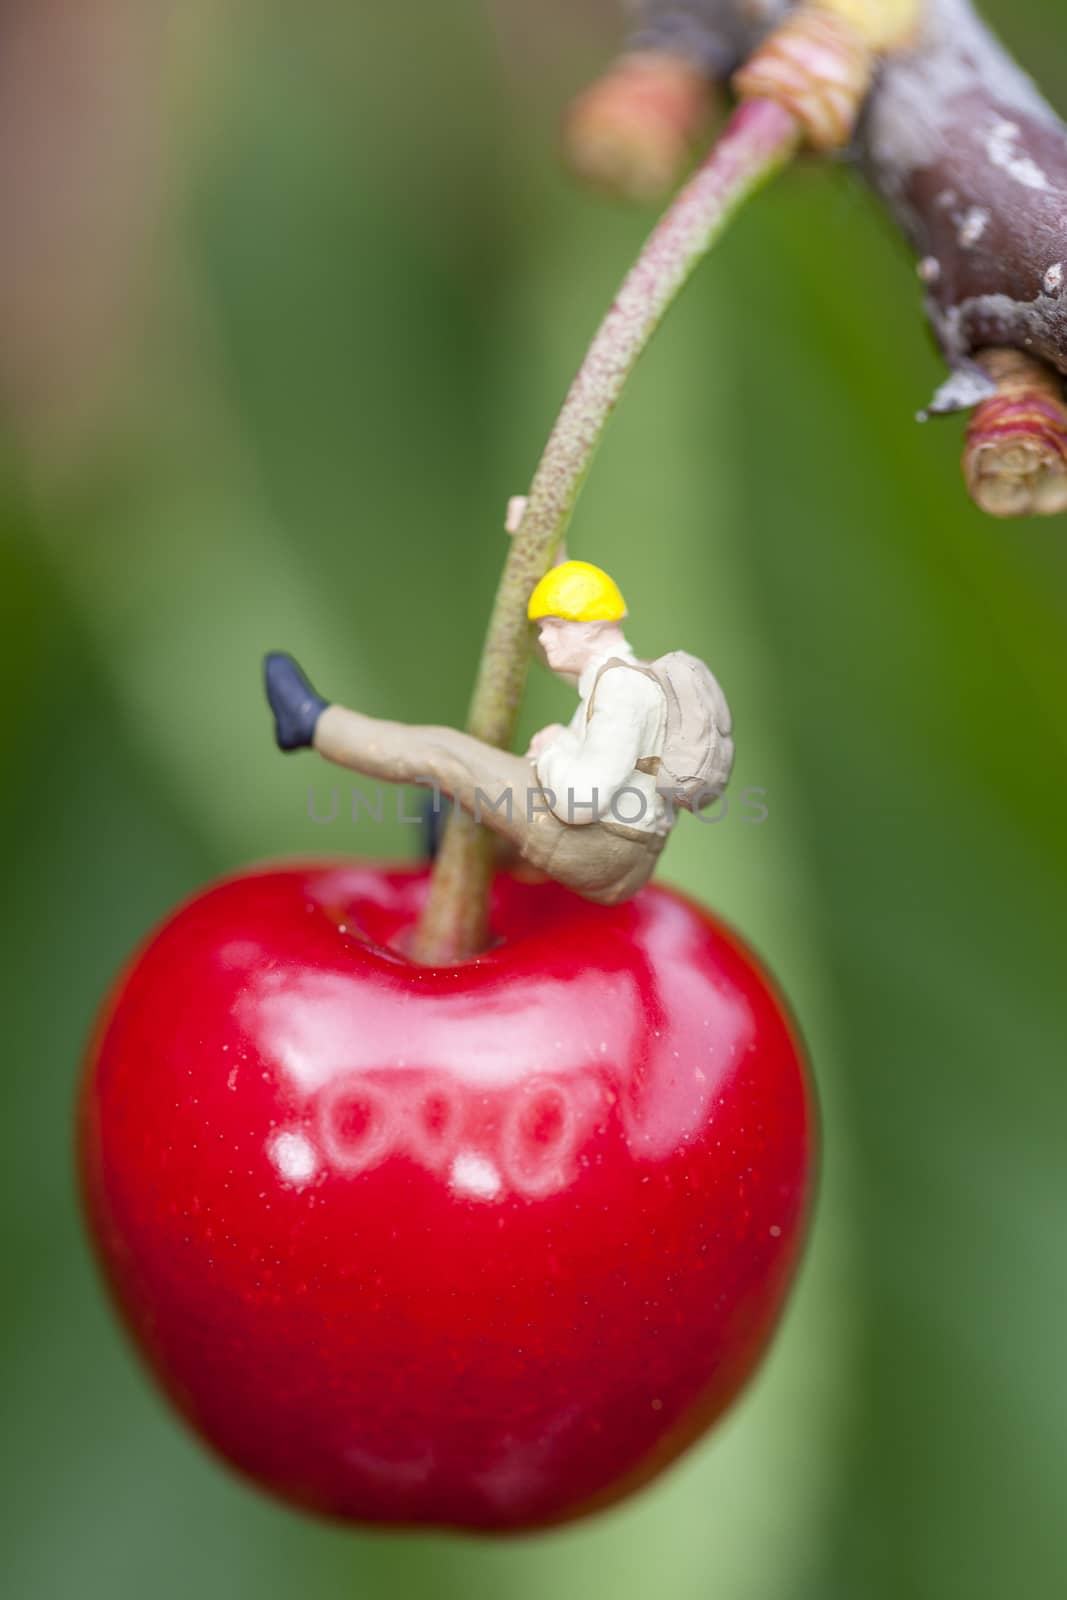 Cherry on a cherry tree branch with mountaineer